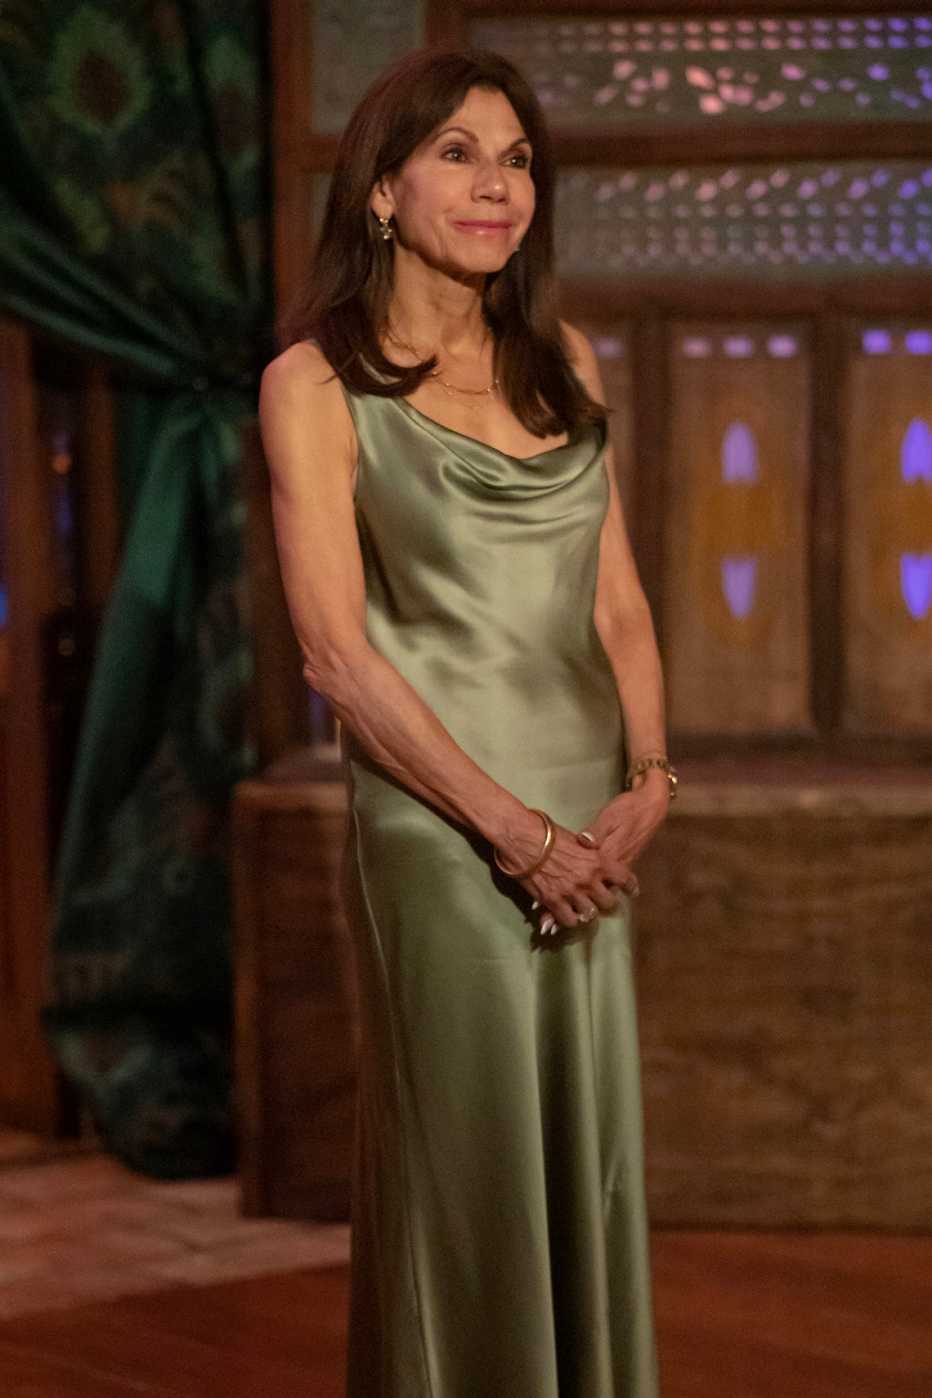 Theresa at the rose ceremony on "The Golden Bachelor."